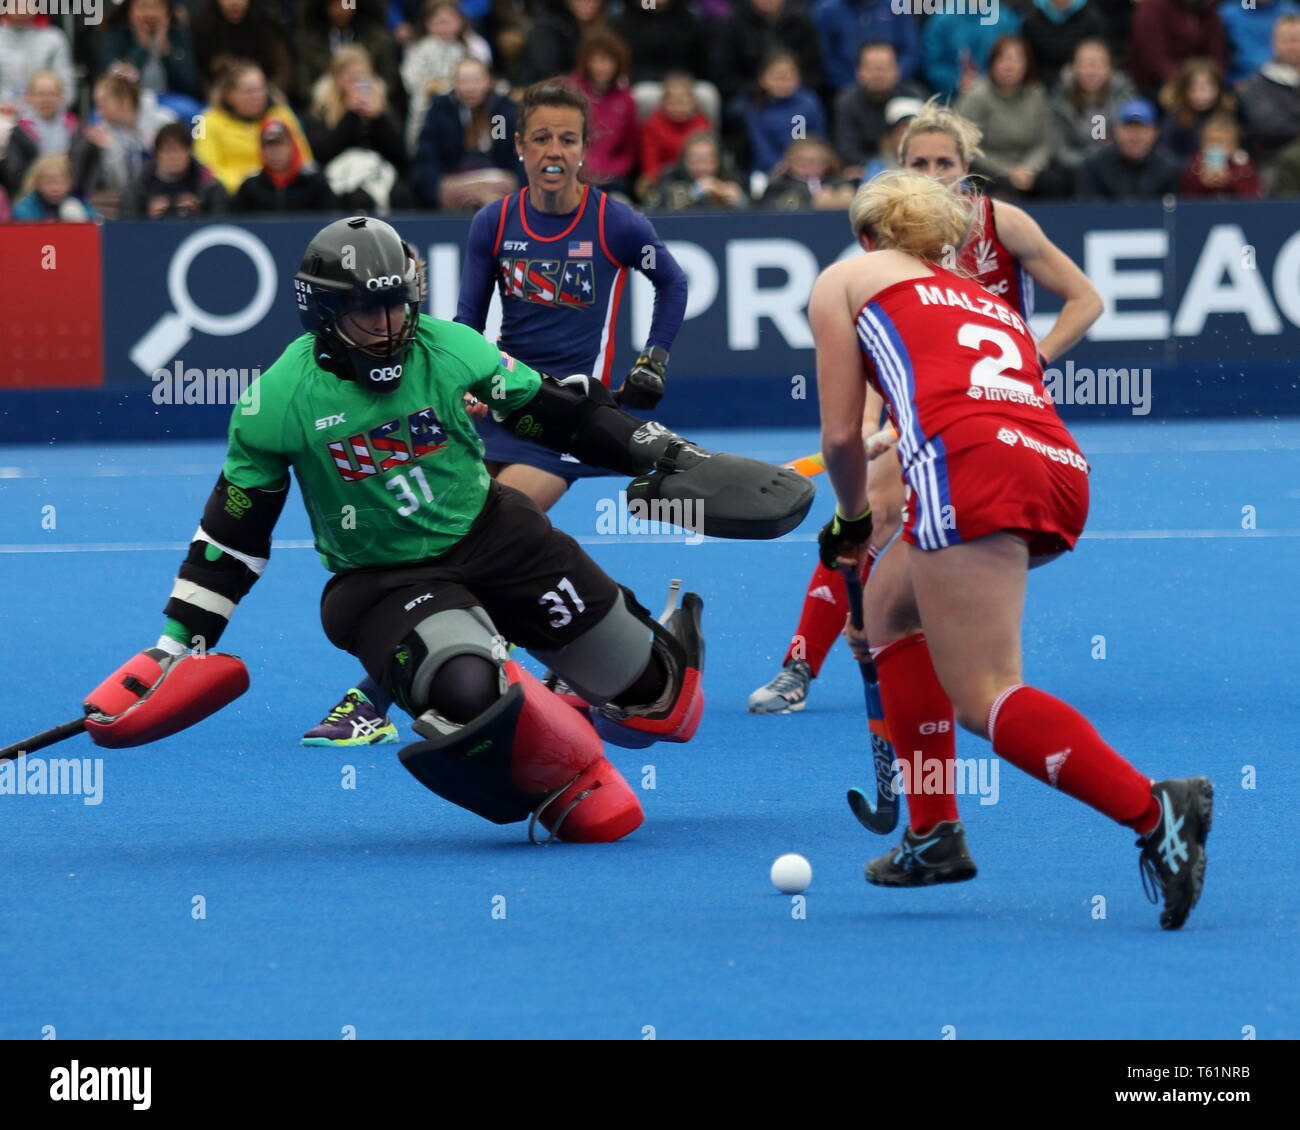 Alex Malzer (GBR) looking to shoot in the 2019 FIH Pro League Great Britain v United States women’s hockey match at the Olympic Park, London Stock Photo